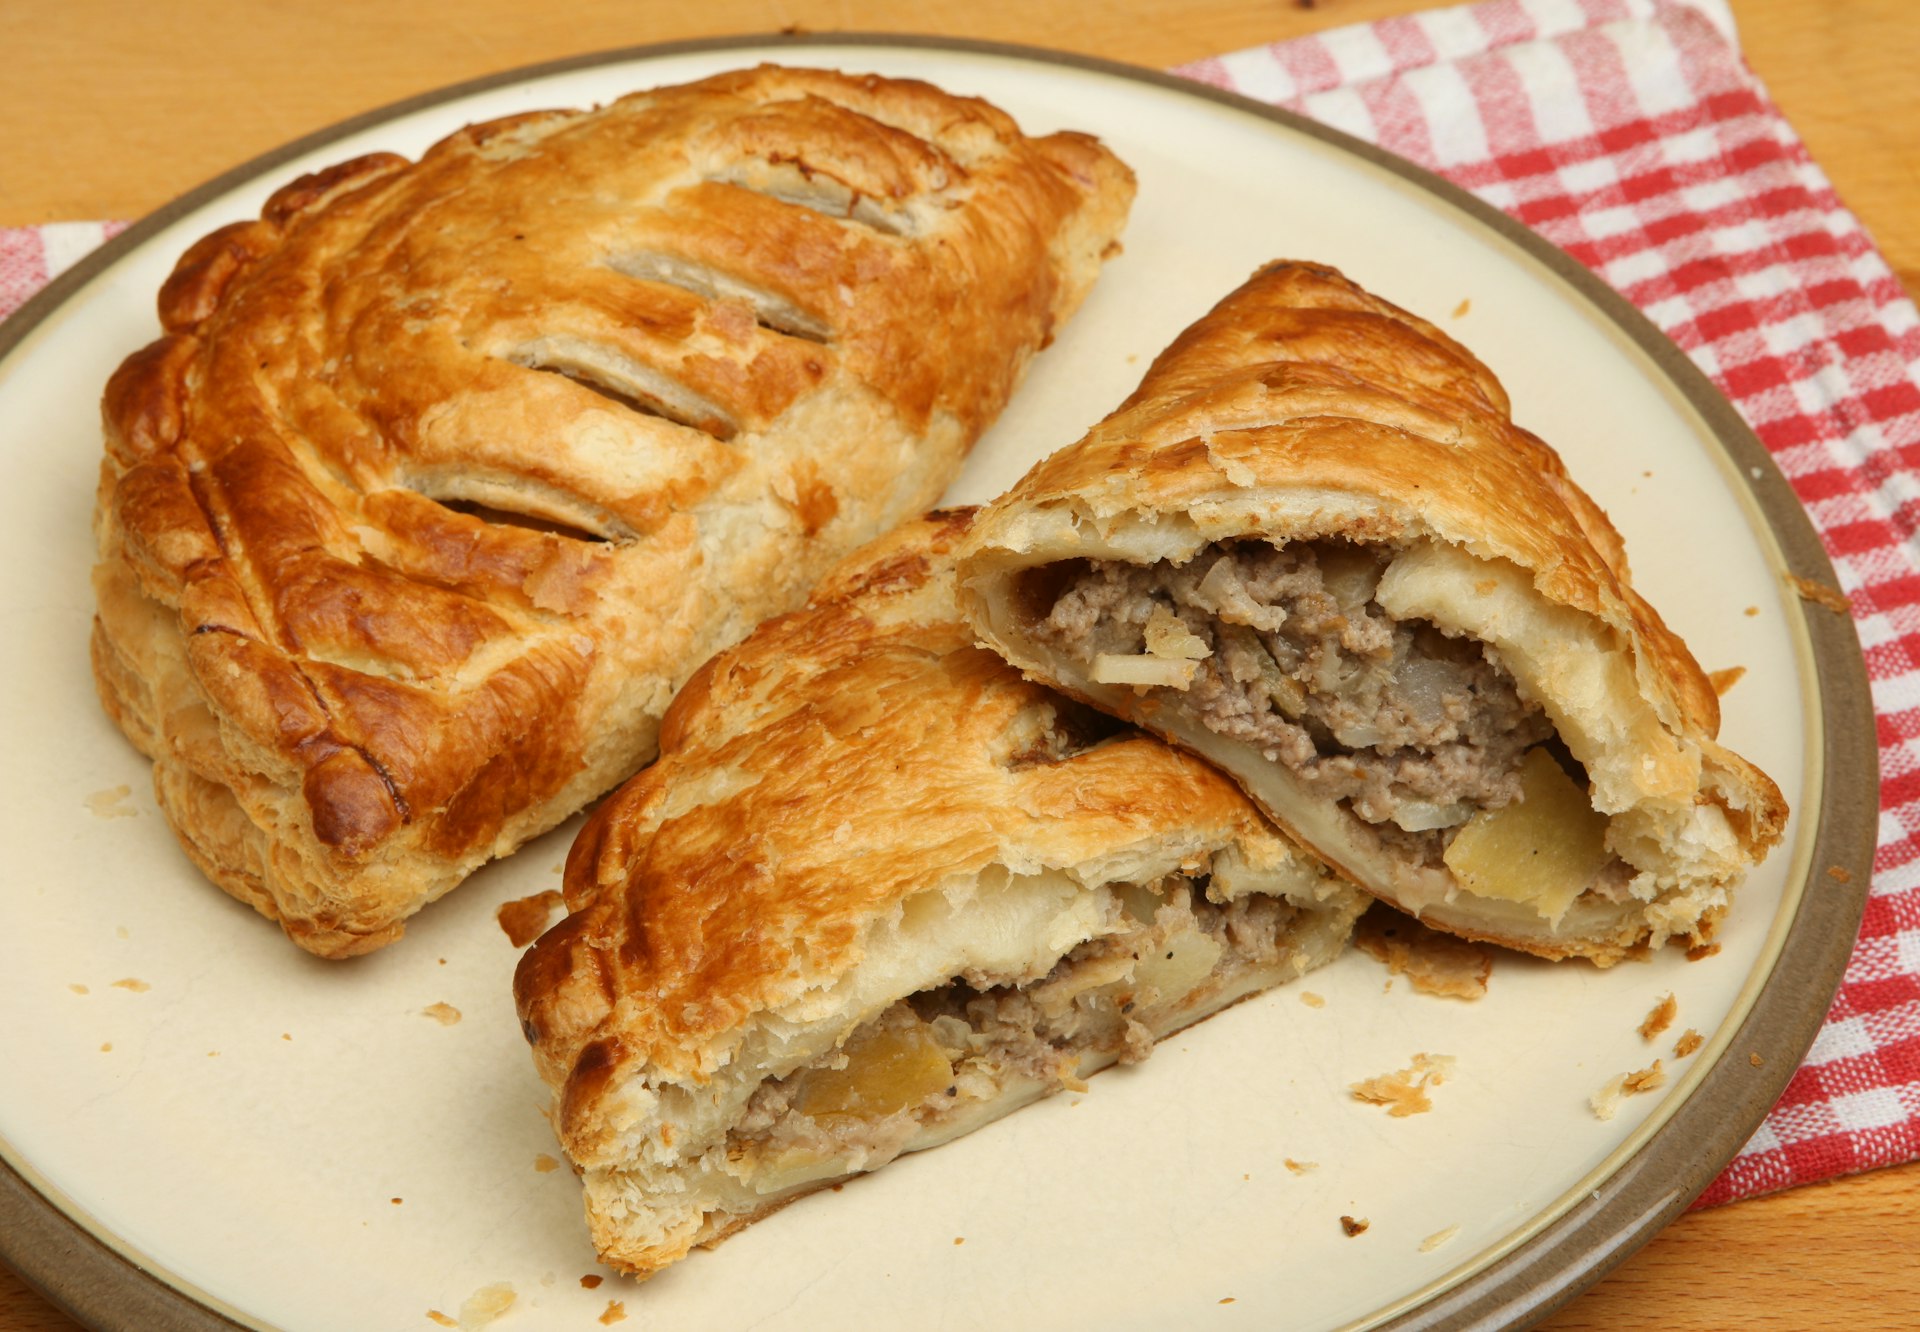 A pair of freshly baked Cornish pasties sit on a white plate. One of the pasties have been cut open to show the minced meat and onions inside. There is a red and white cloth napkin underneath the plate.